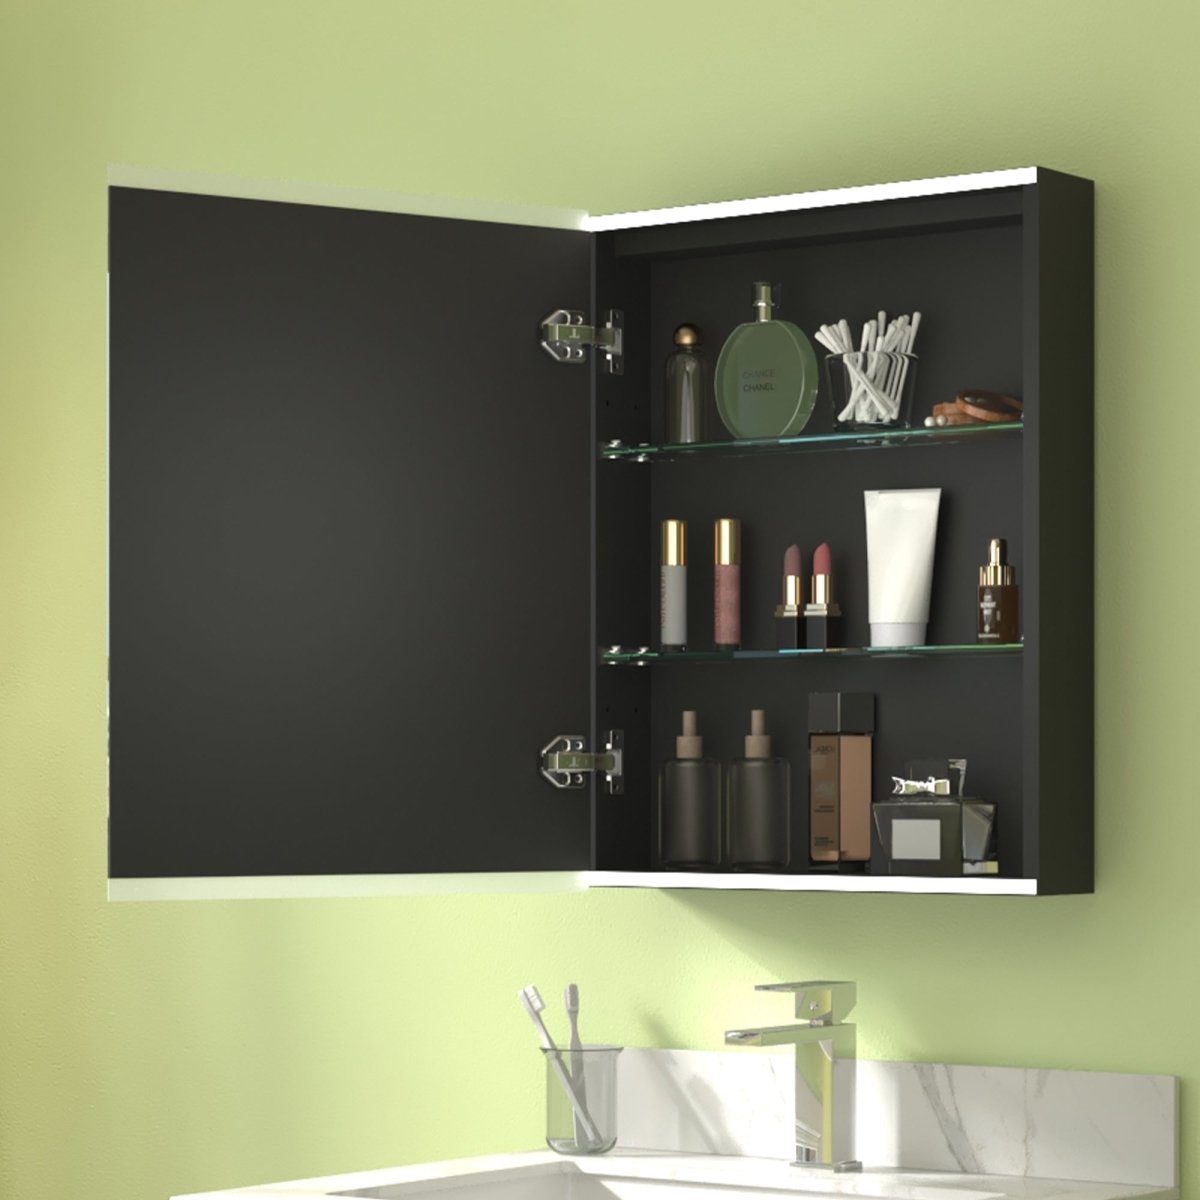 Classic 20" W x 26" H LED Bathroom Light Medicine Cabinet with Mirrors Left Side - ExBriteUSA